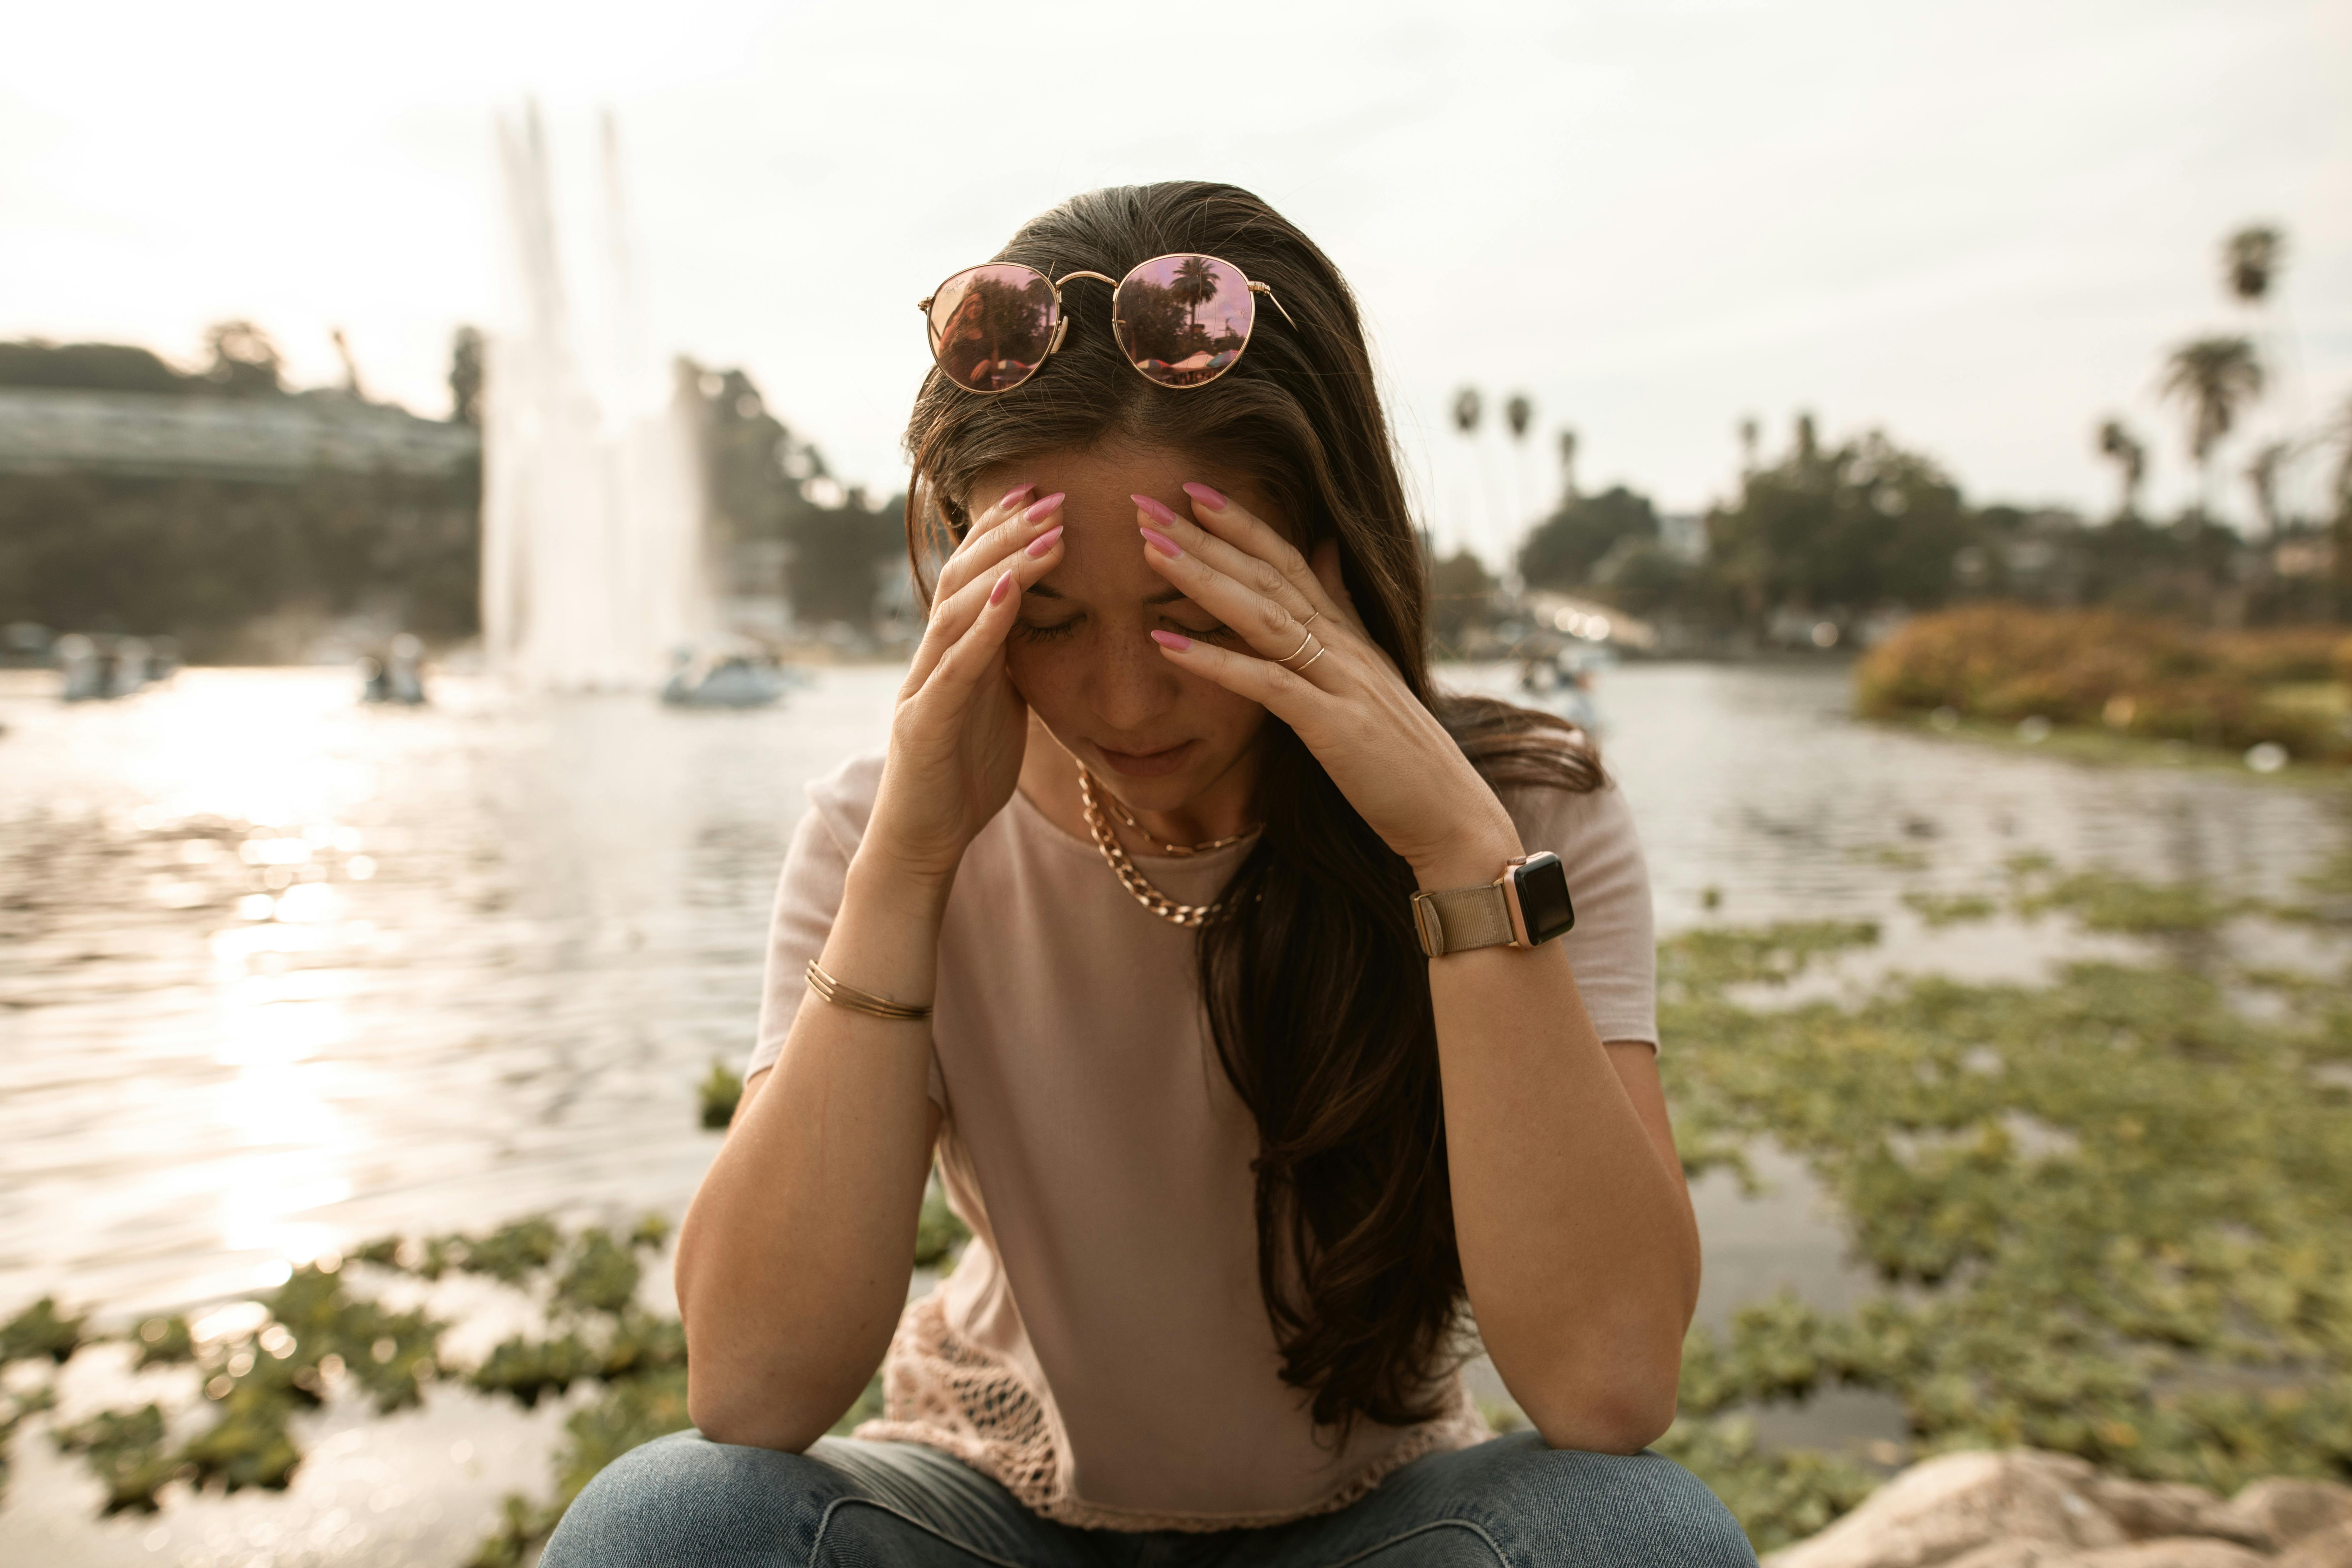 A distressed woman sitting on lakeside and touching her face in despair | Source: Pexels